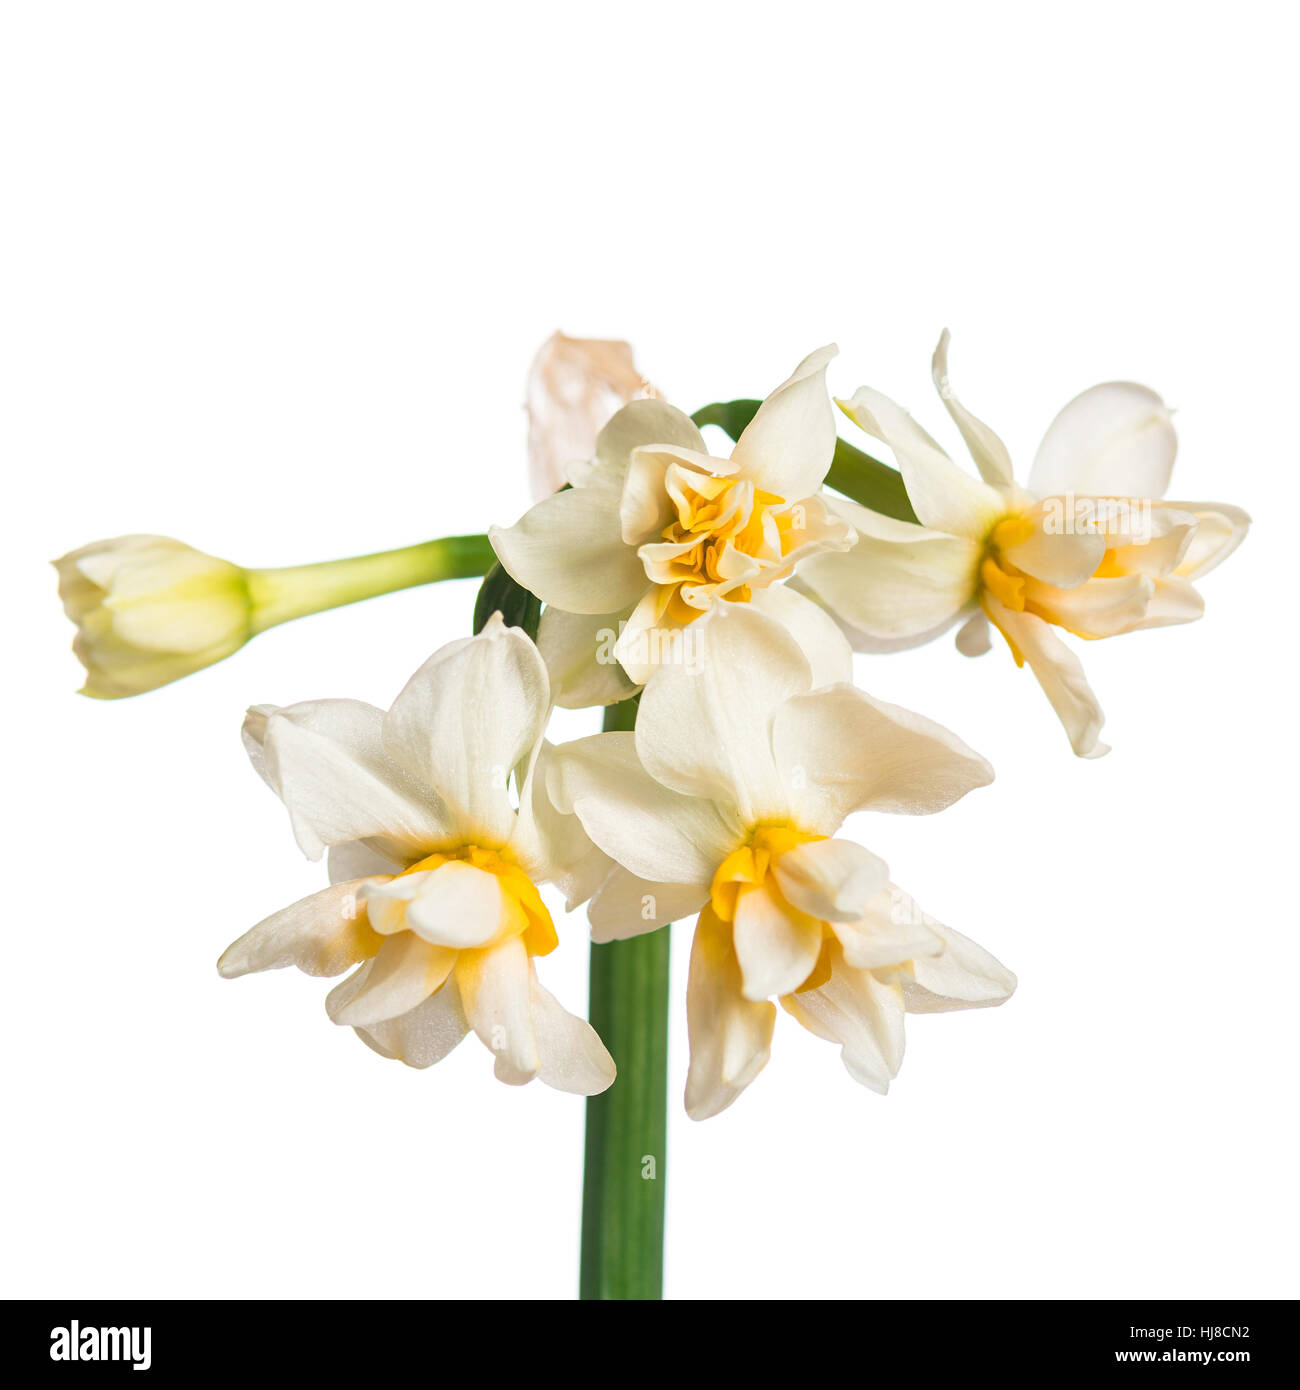 Sprig of daffodils background Stock Photo